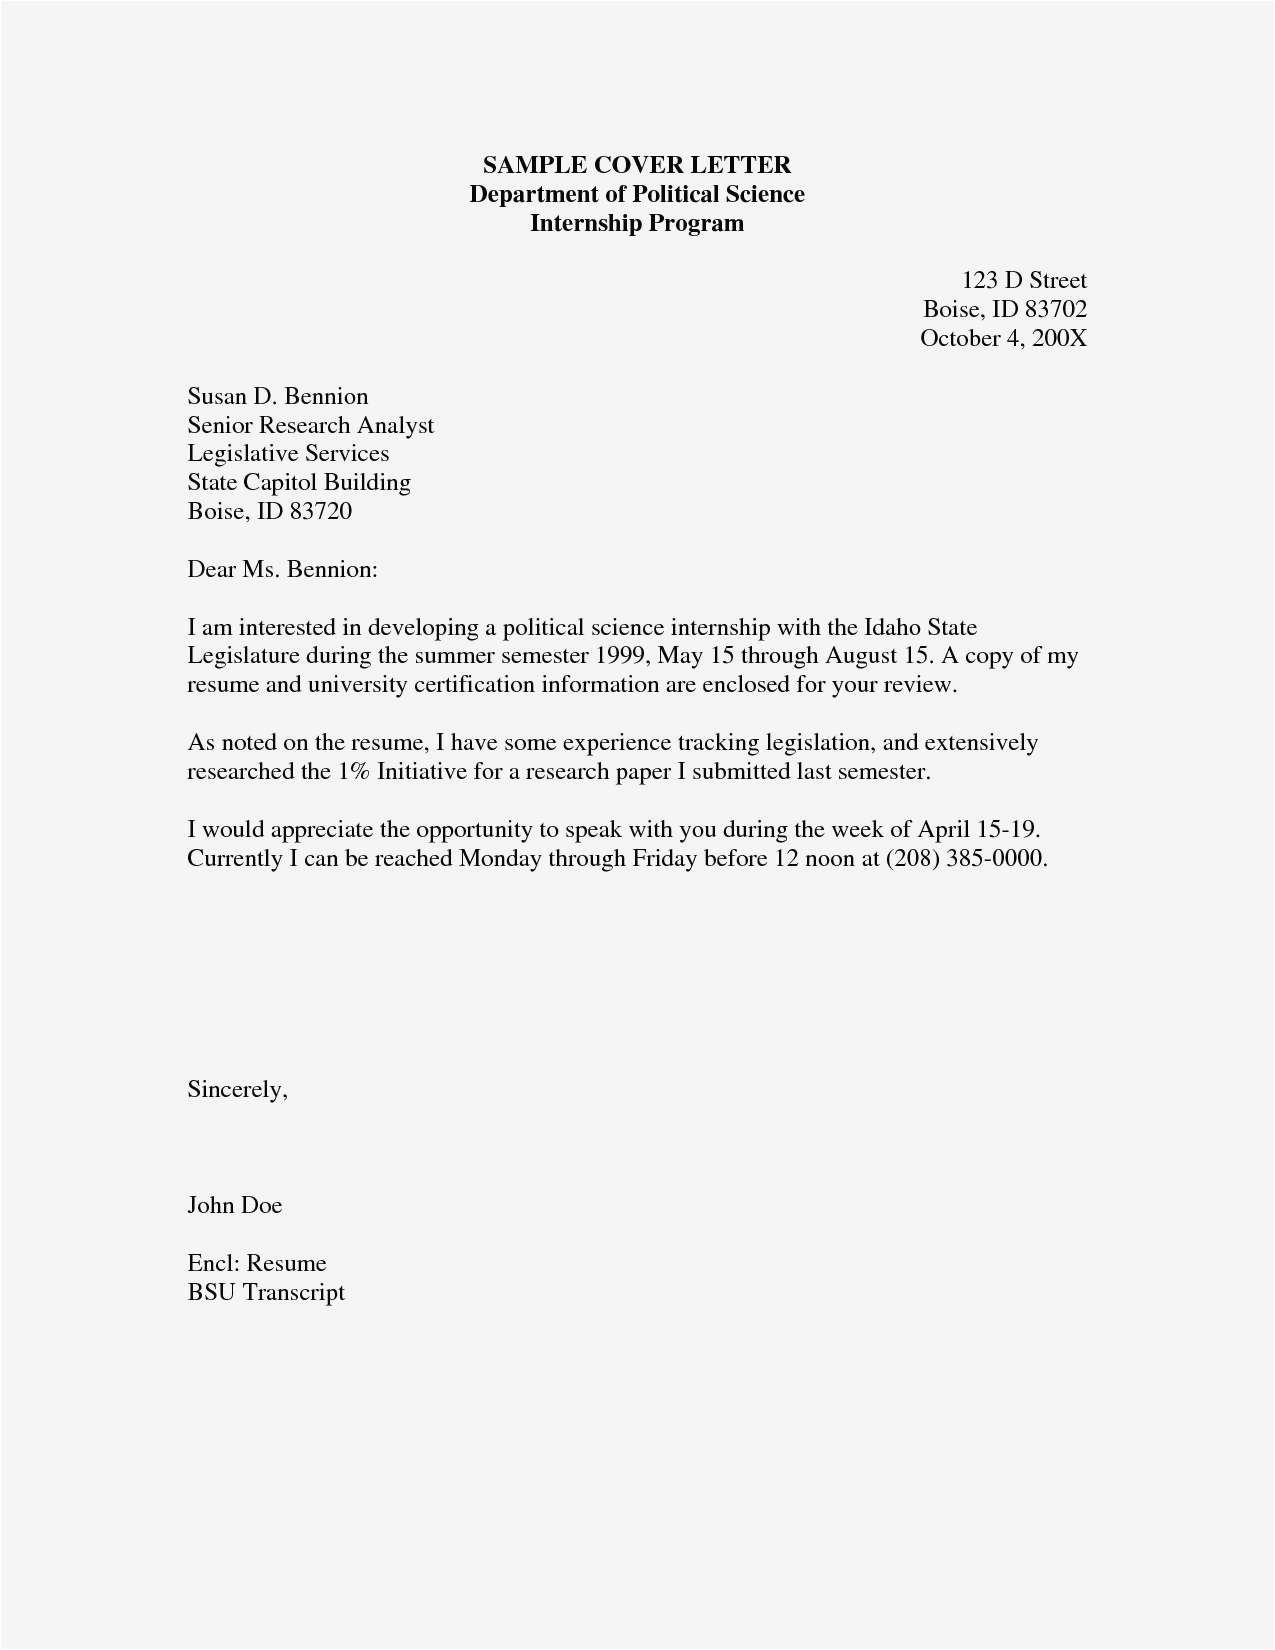 Resume Cover Letter Samples with No Experience 26 No Experience Cover Letter